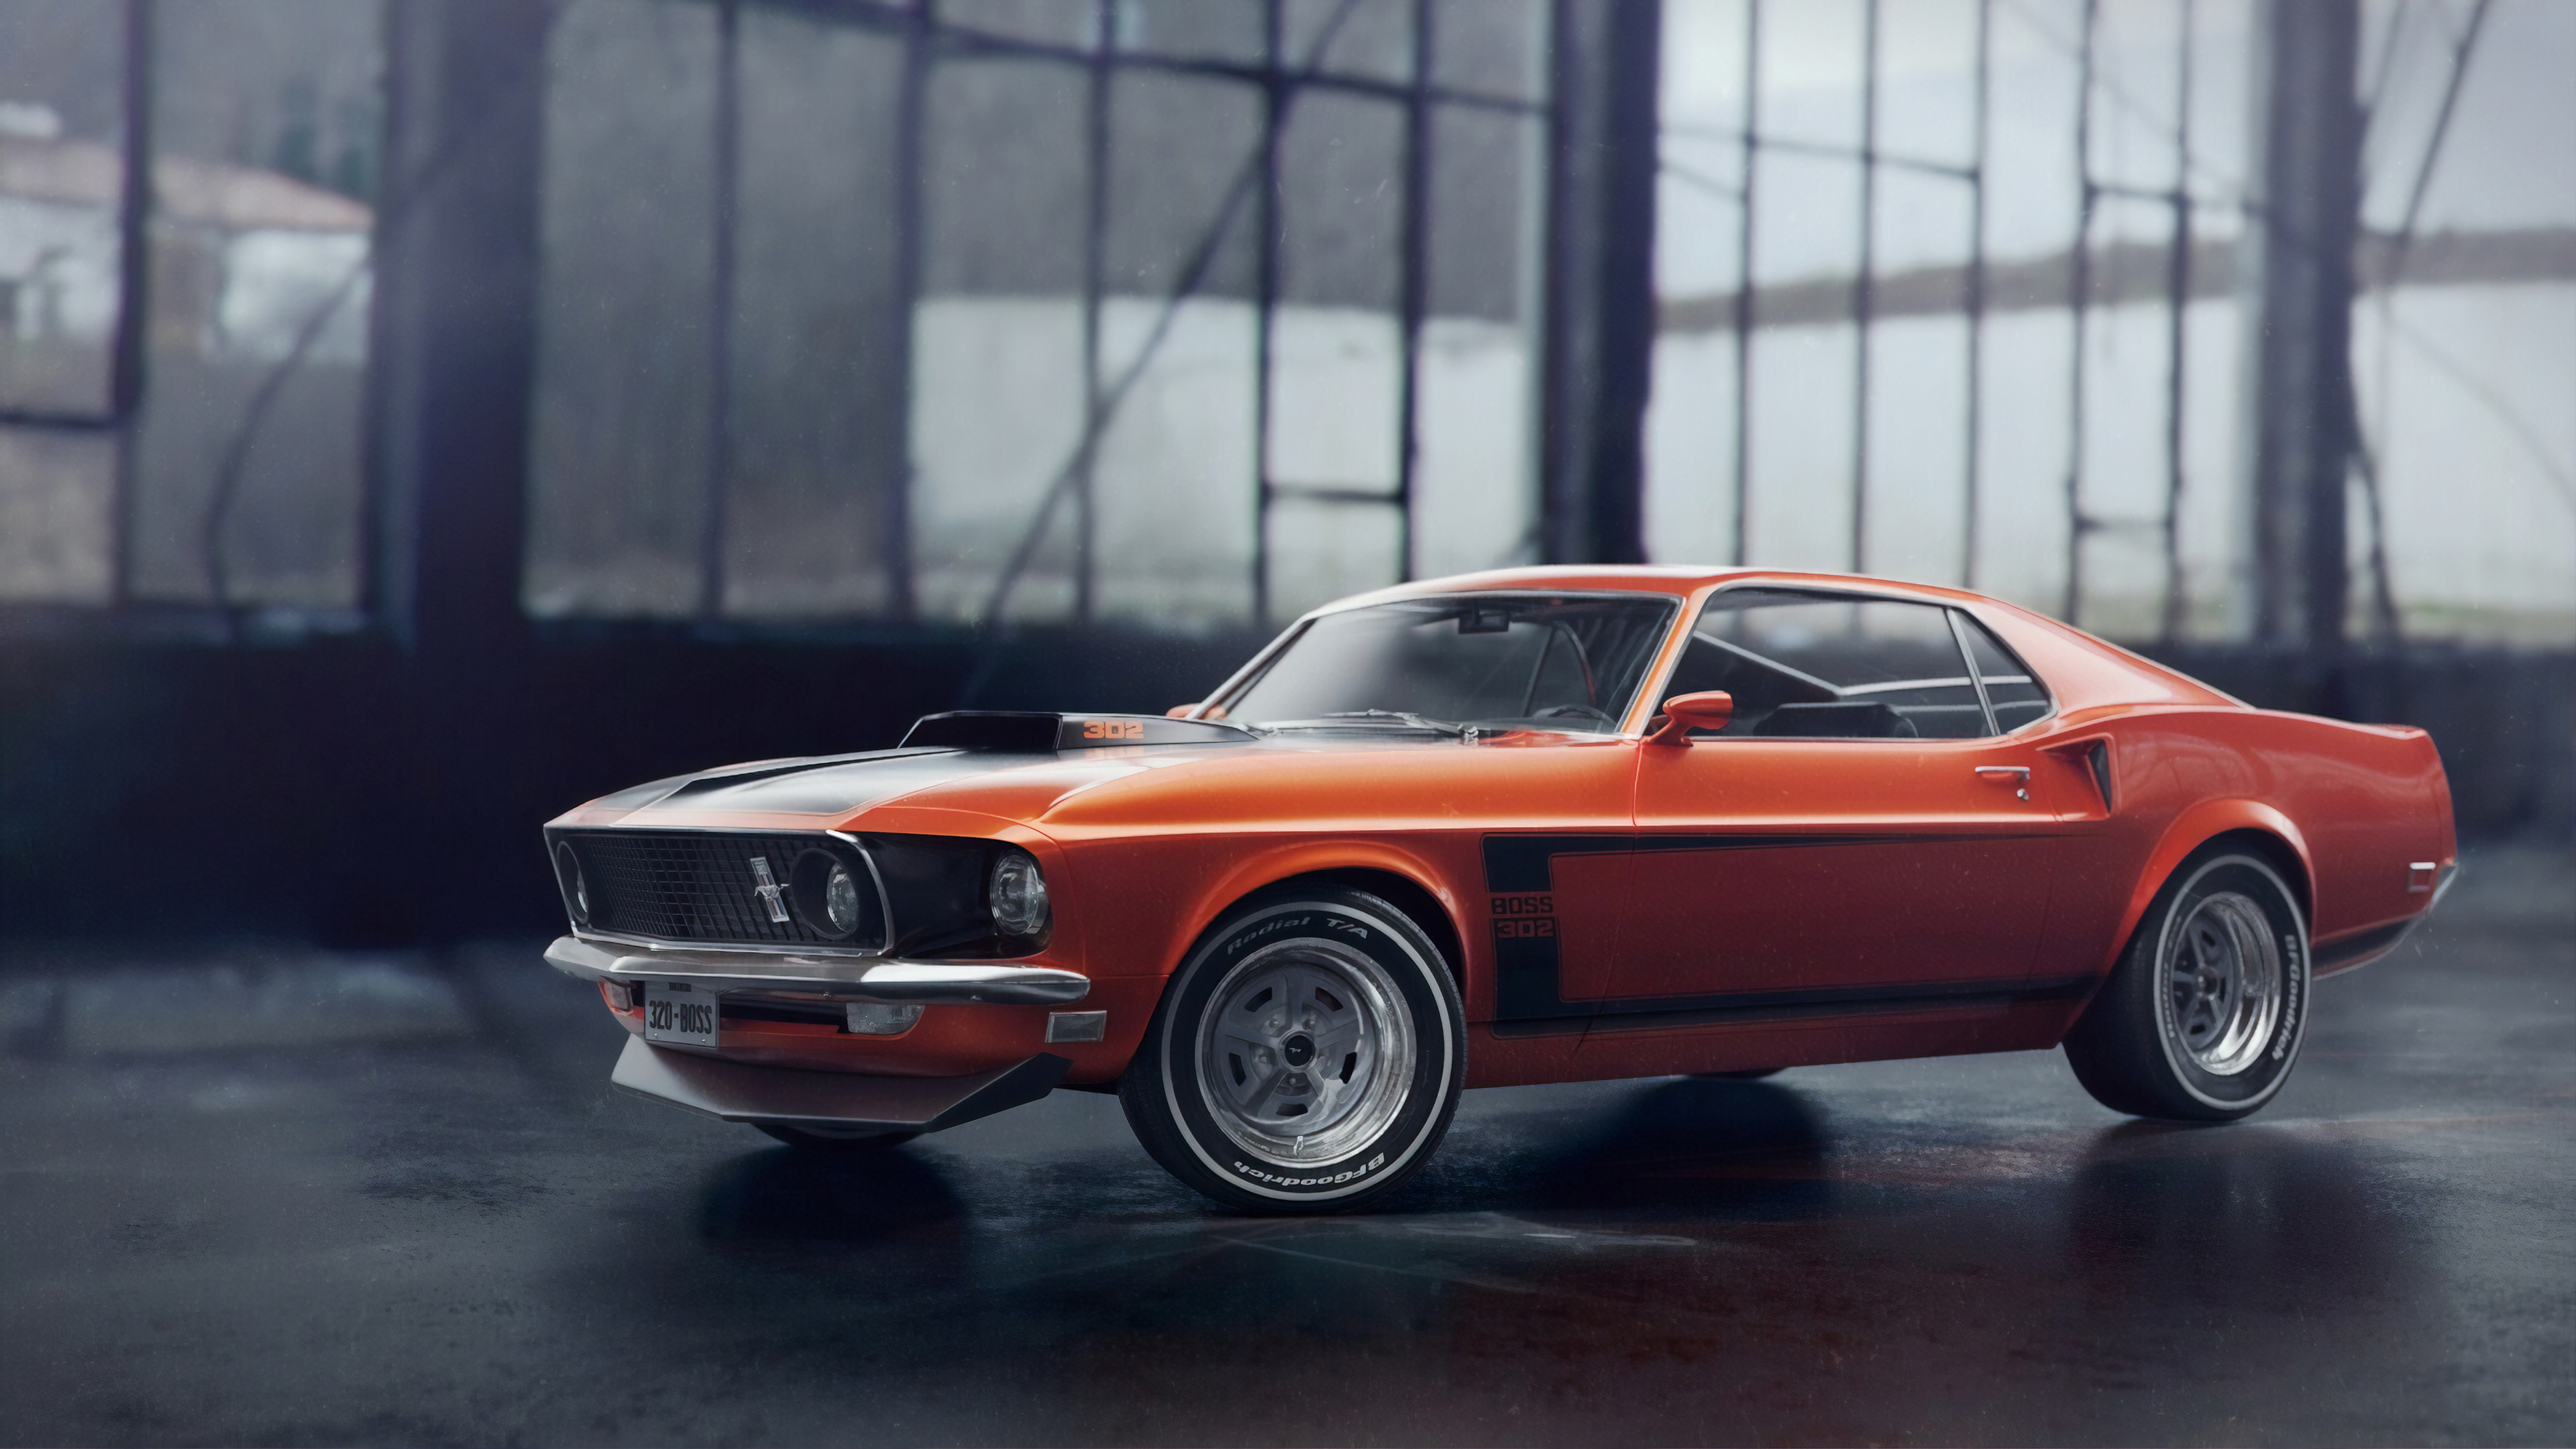 Car Ford Ford Mustang Ford Mustang Boss 302 Muscle Car Orange Car Vehicle 3840x2160